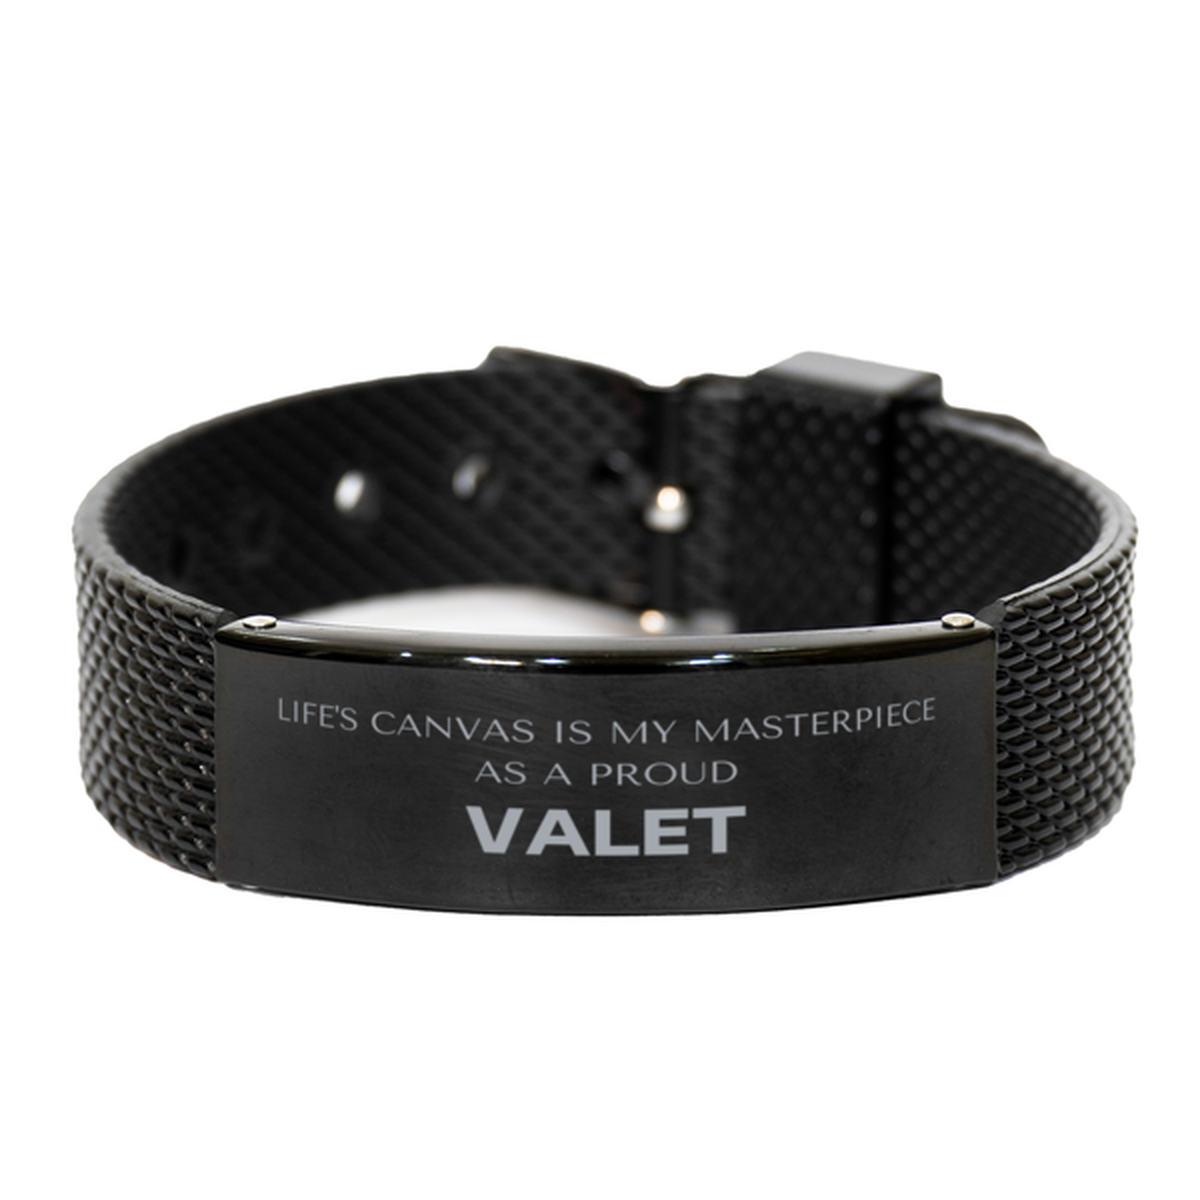 Proud Valet Gifts, Life's canvas is my masterpiece, Epic Birthday Christmas Unique Black Shark Mesh Bracelet For Valet, Coworkers, Men, Women, Friends